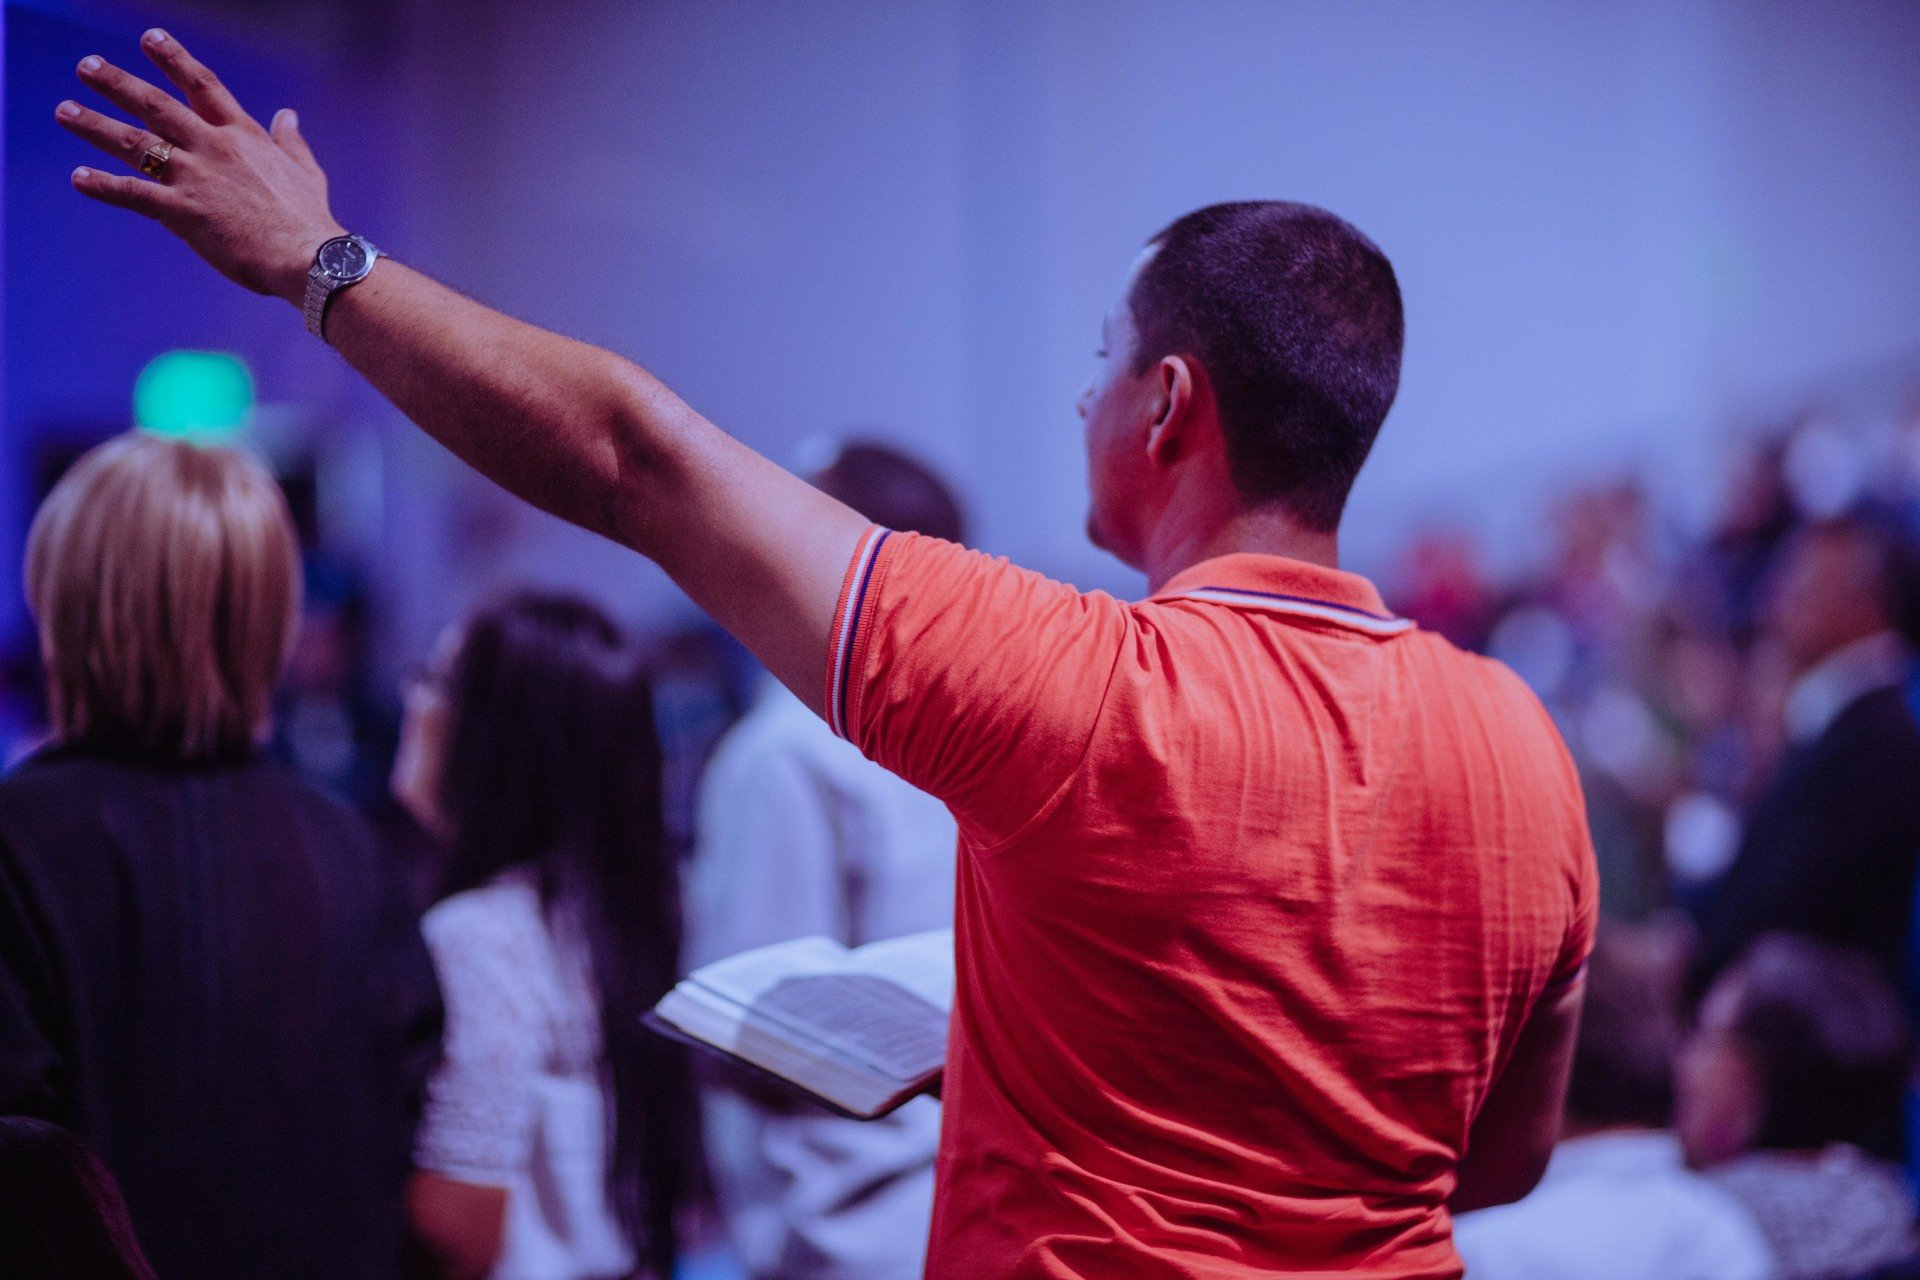 A man in an orange shirt is holding a bible in front of a crowd of people.